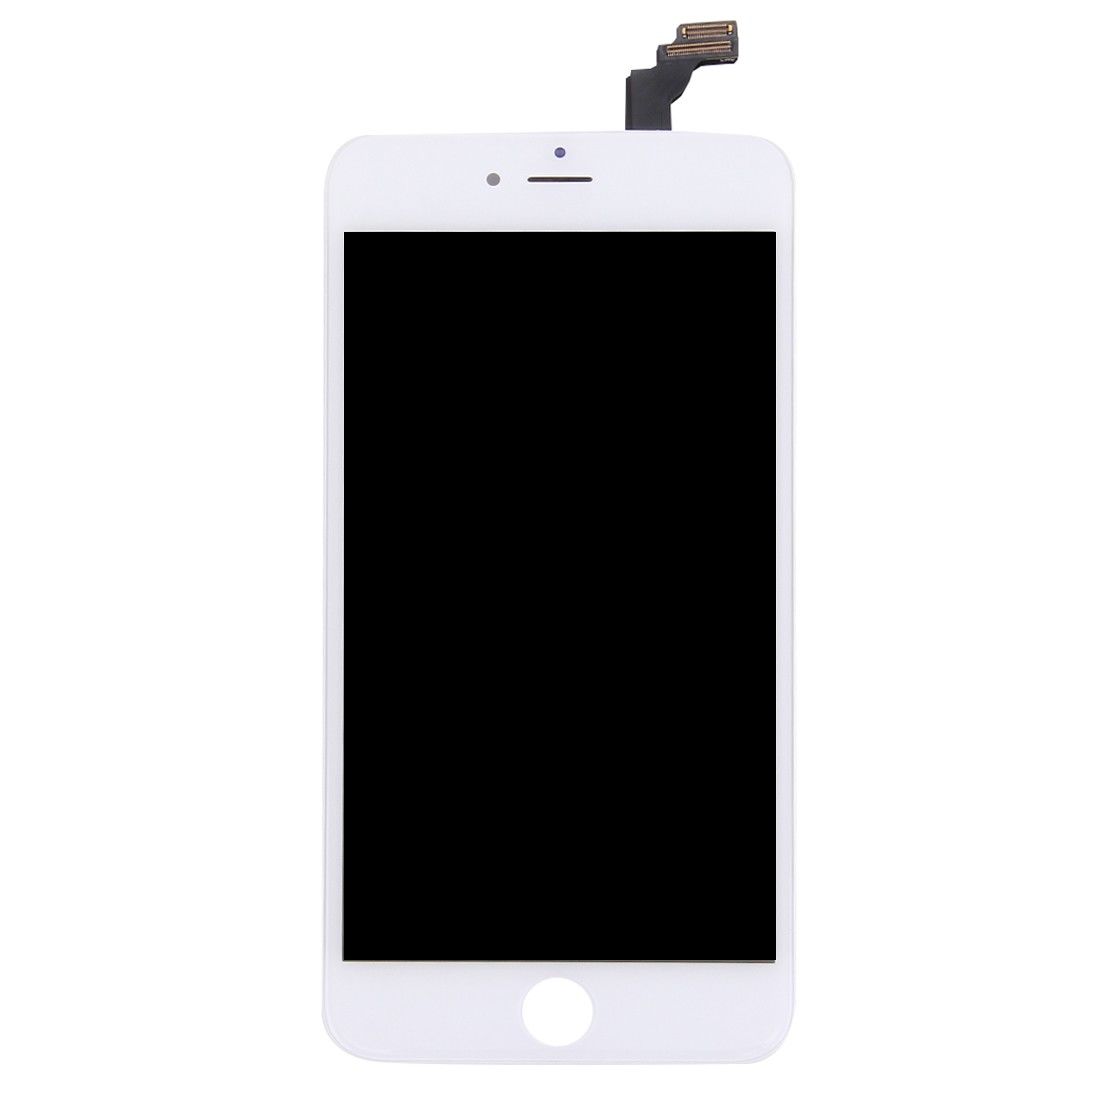 Apple iPhone 6 Plus 5.5" Replacement LCD Touch Screen Assembly - White for [product_price] - First Help Tech